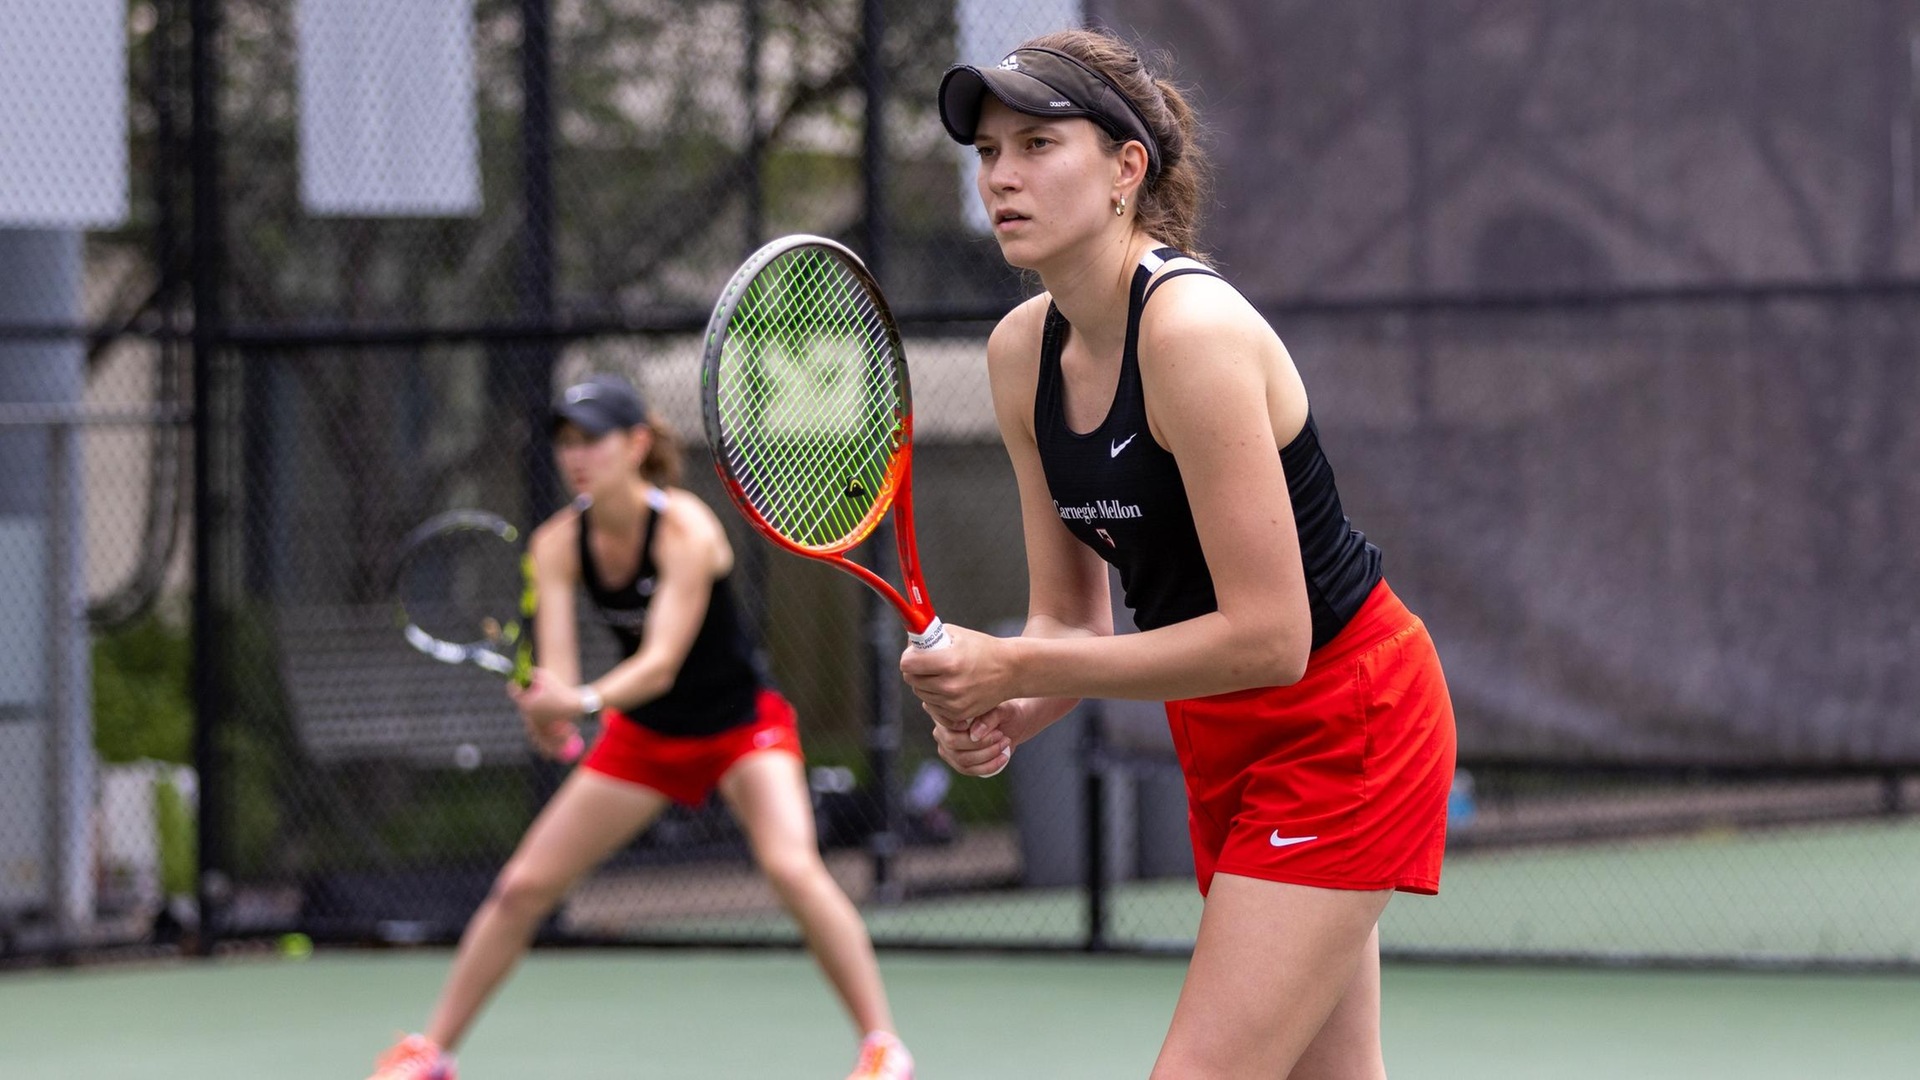 women's tennis player wearing a black top and red shorts holding a racquet